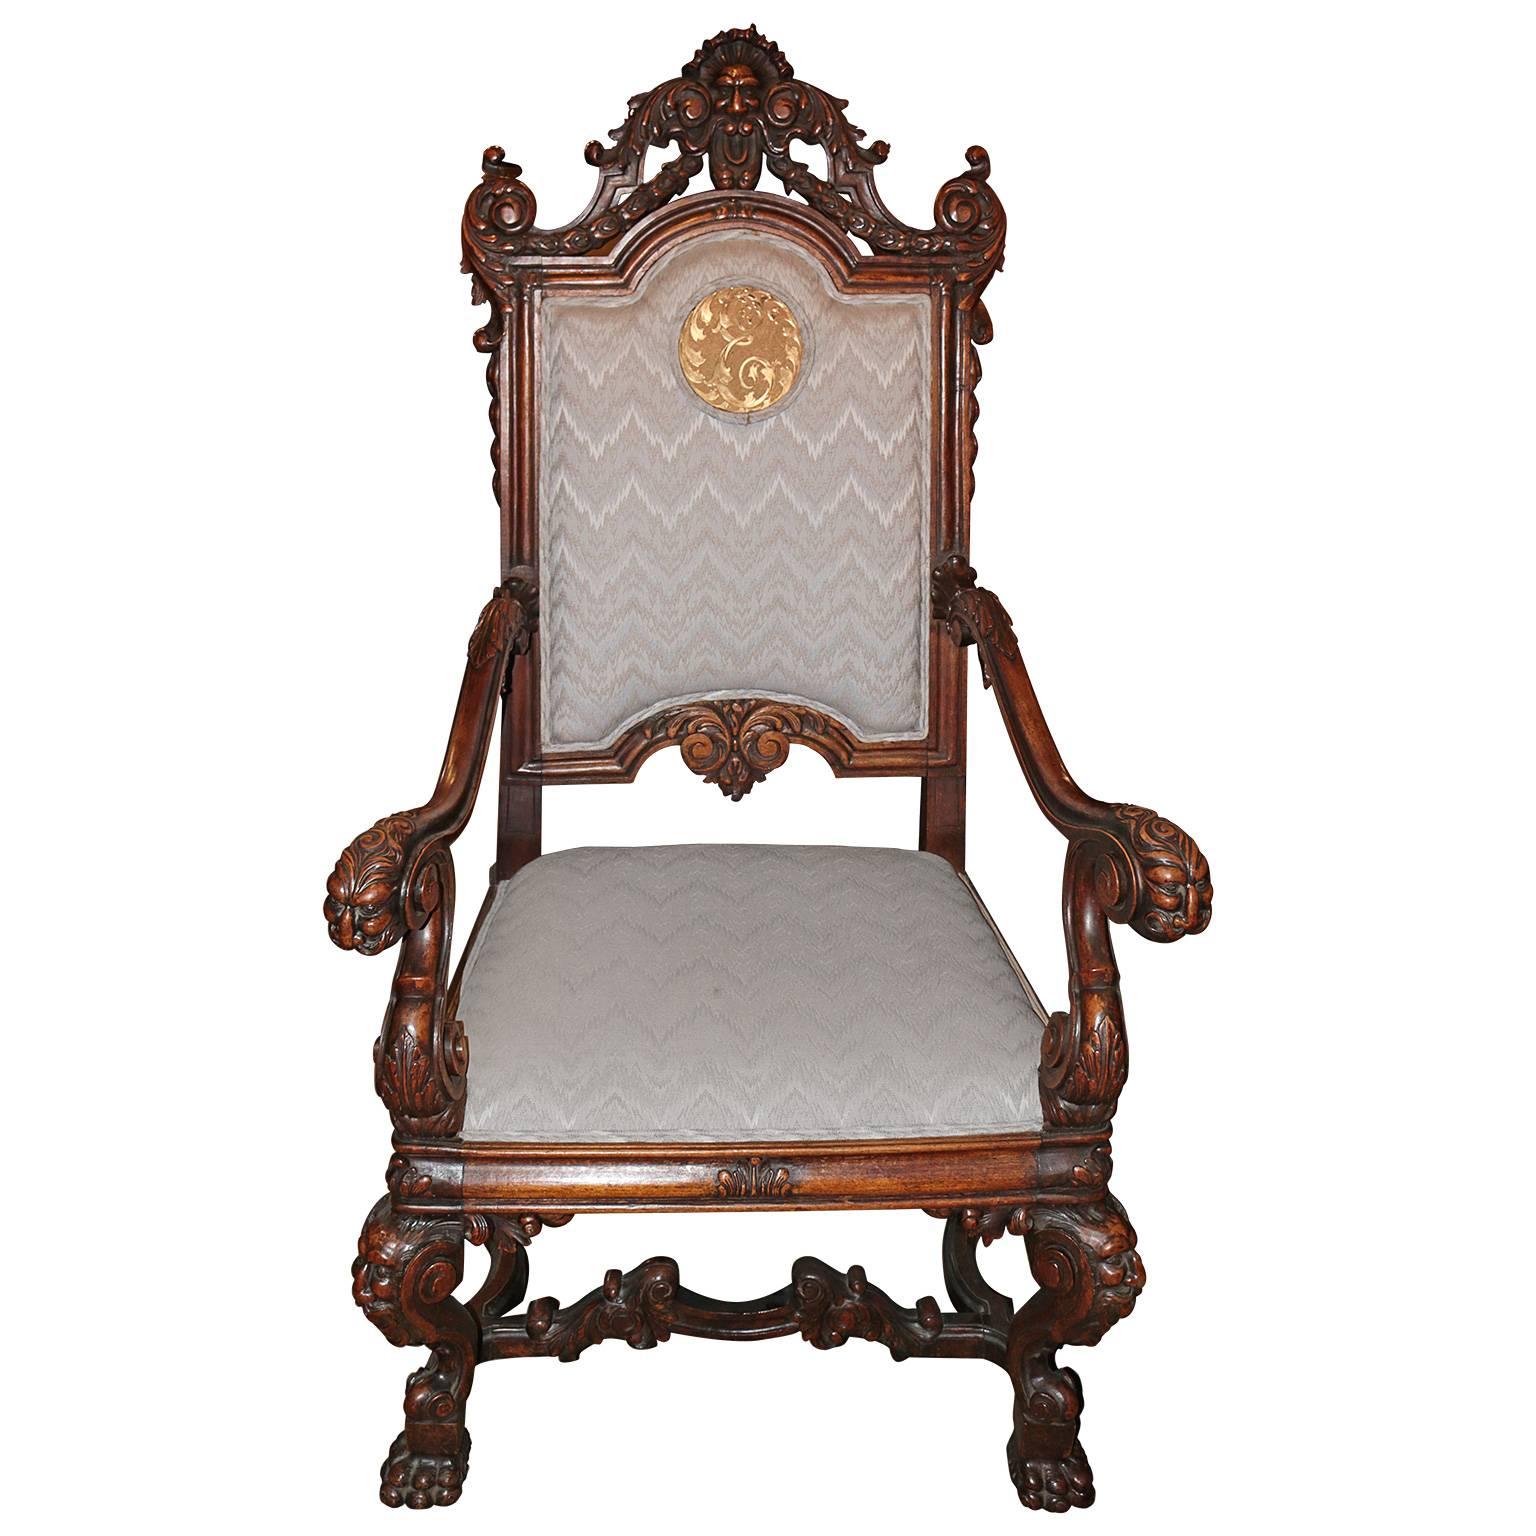 This great early 19th century Spanish hand-carved kings chair with emblem is in great condition. The hand-carved arms and legs have amazing patina. The details are all hand-carved with precision and skill. The centre piece of this beautiful chair is